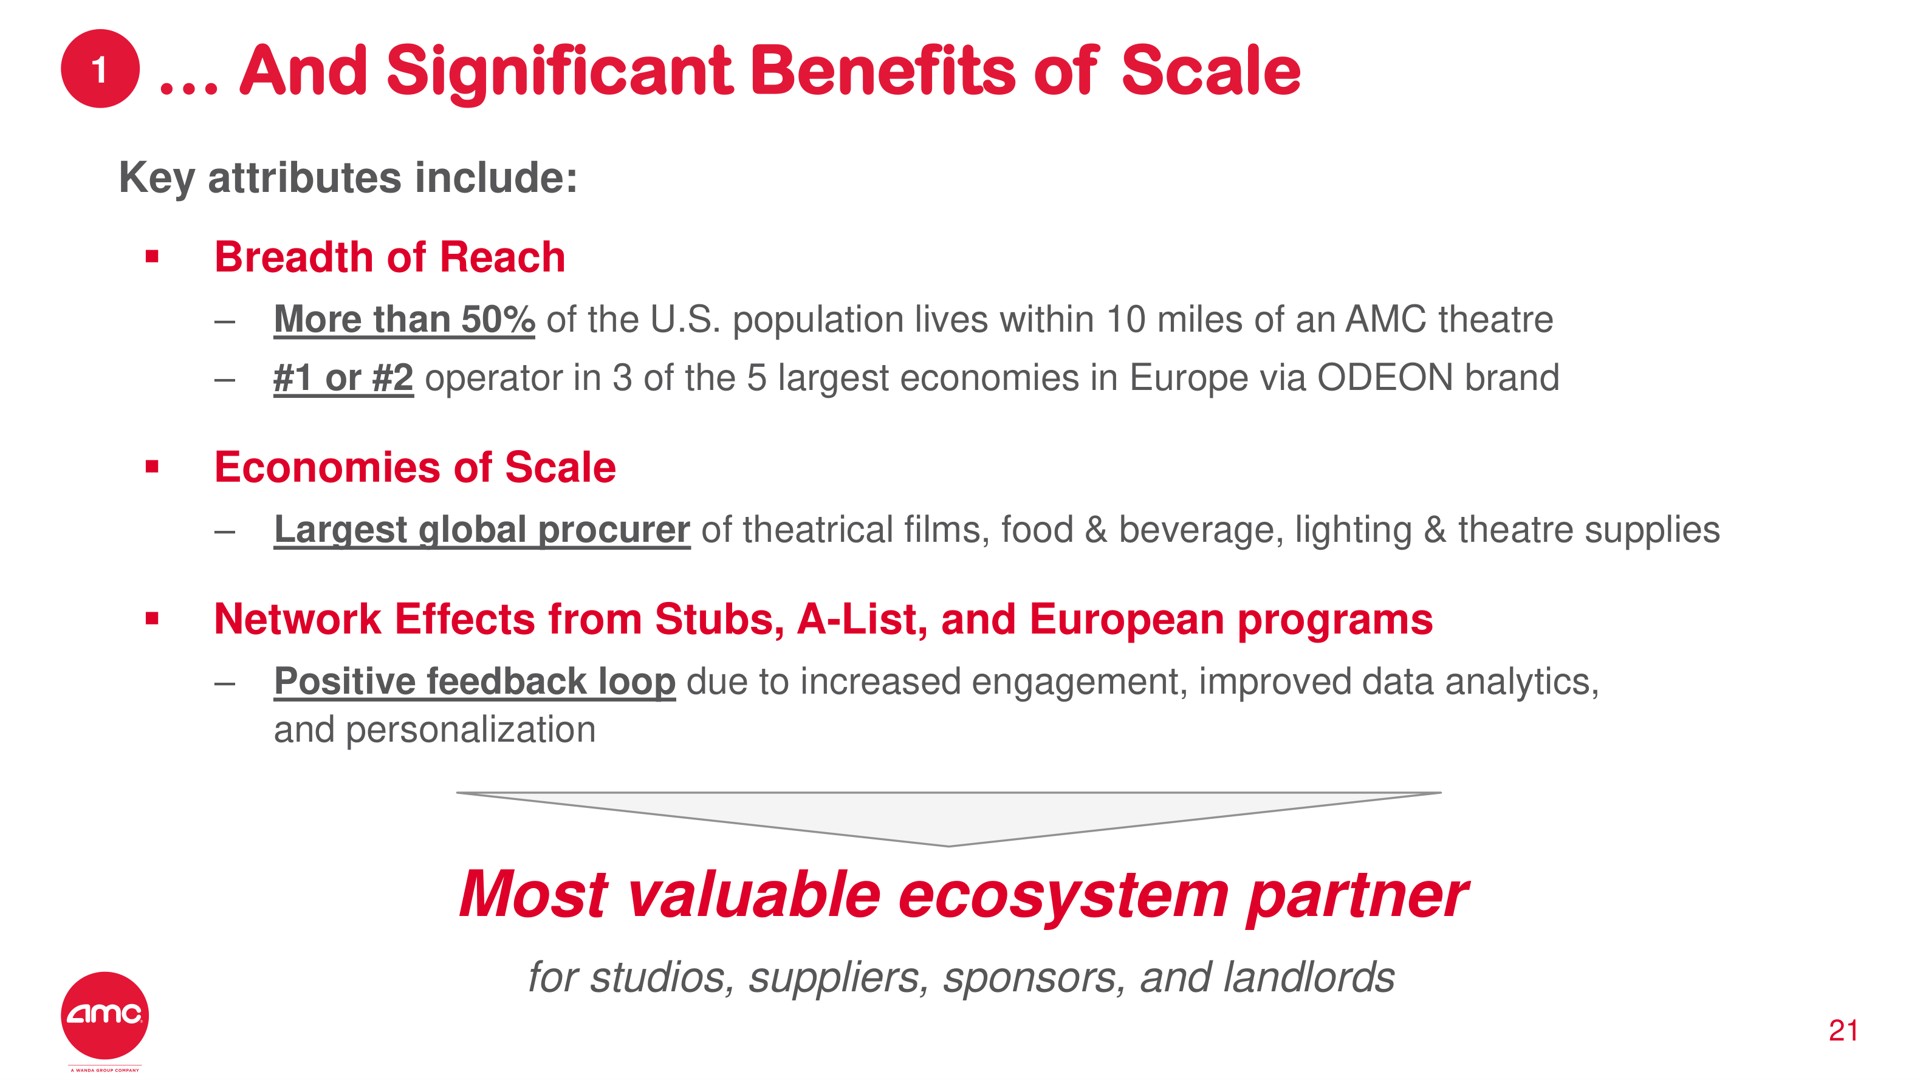 and significant benefits of scale most valuable ecosystem partner | AMC